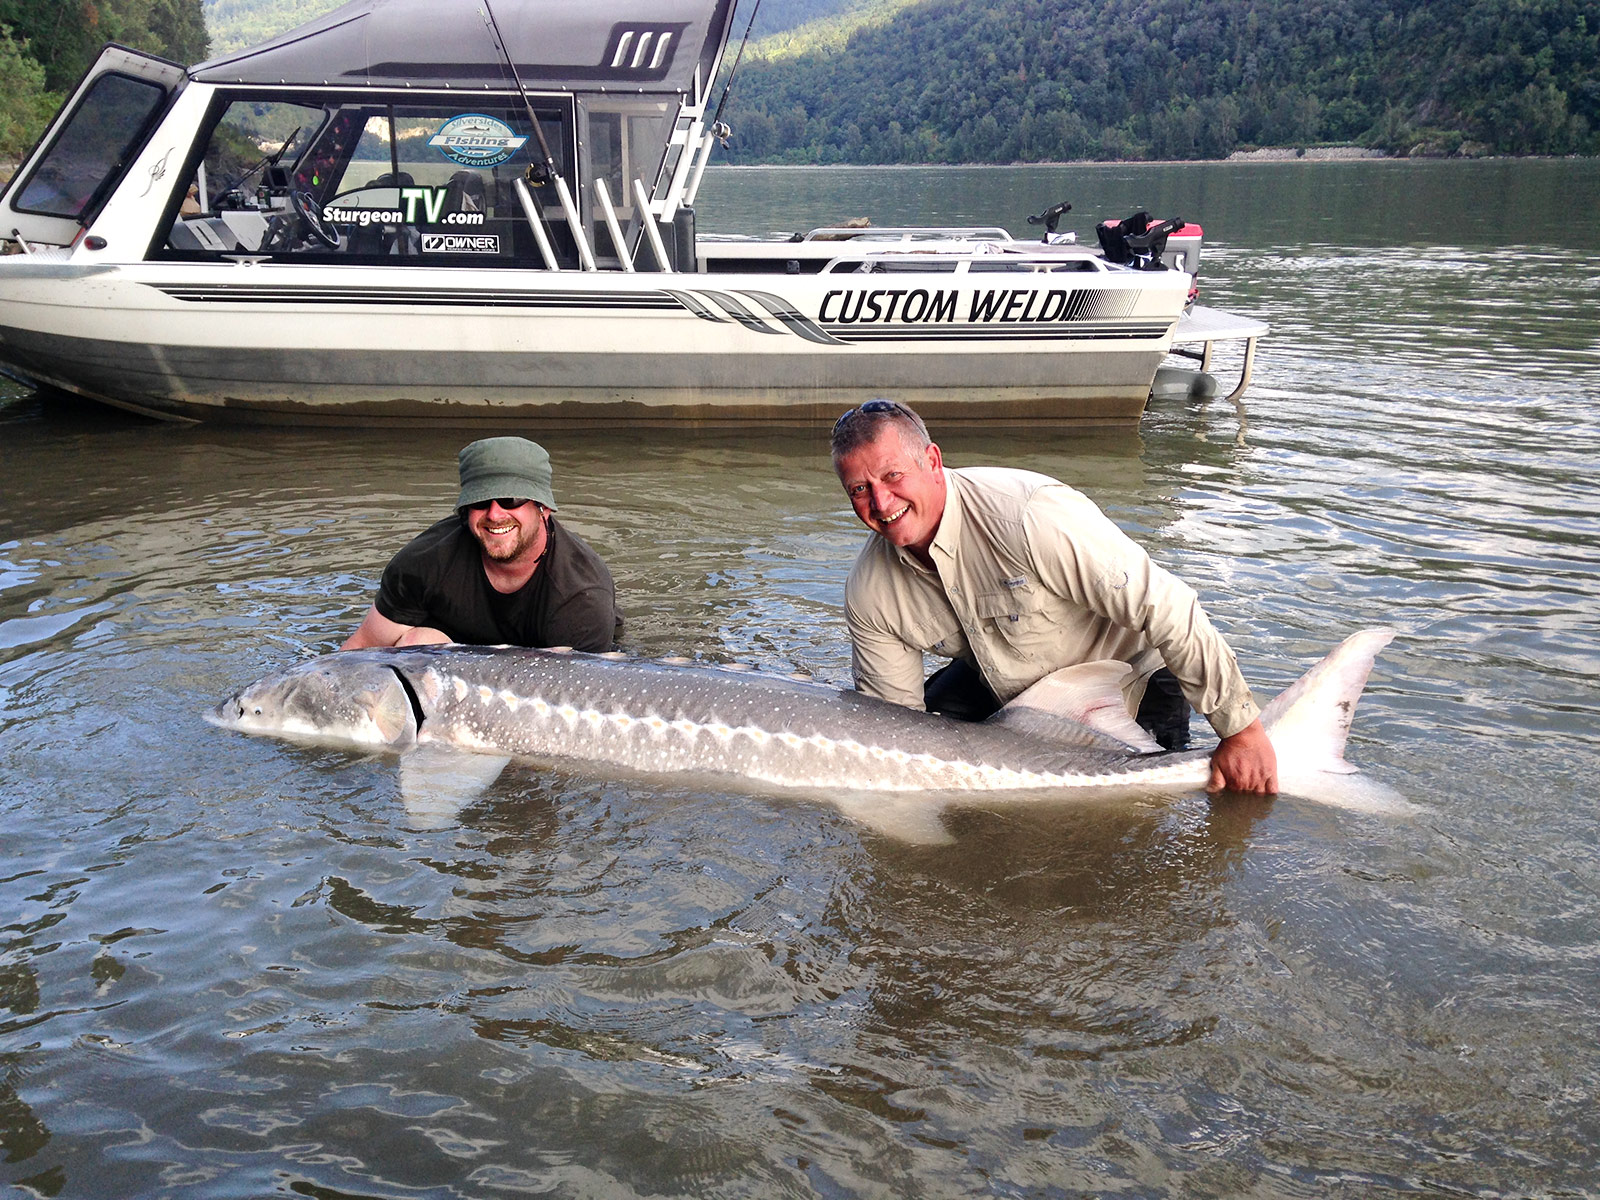 How to Catch Sturgeon - How to Fish the Fraser River for Sturgeon 